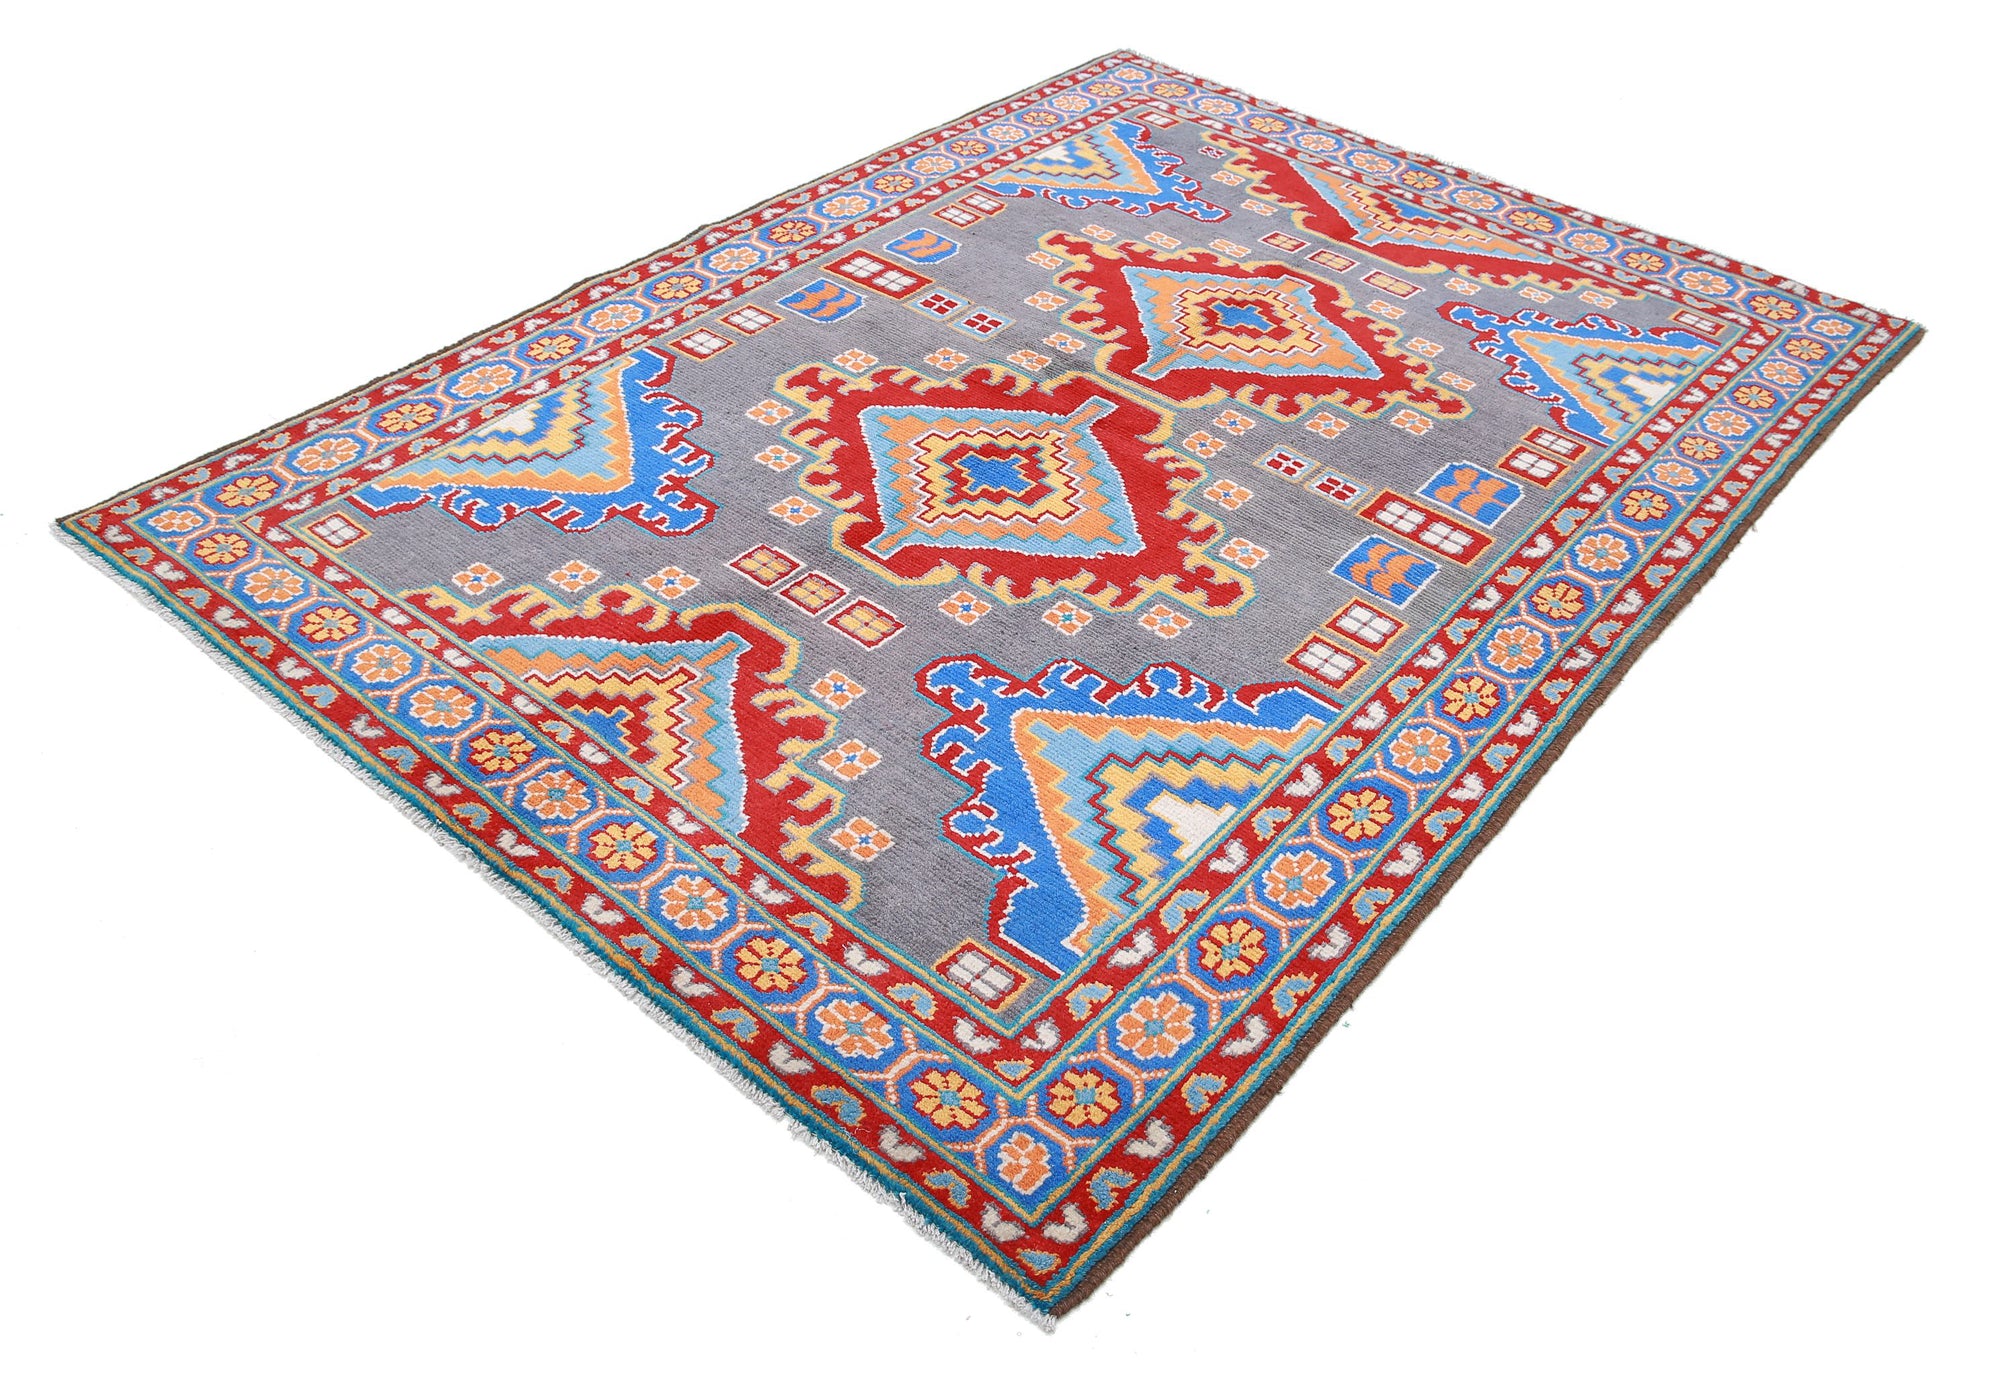 Revival-hand-knotted-qarghani-wool-rug-5014221-2.jpg